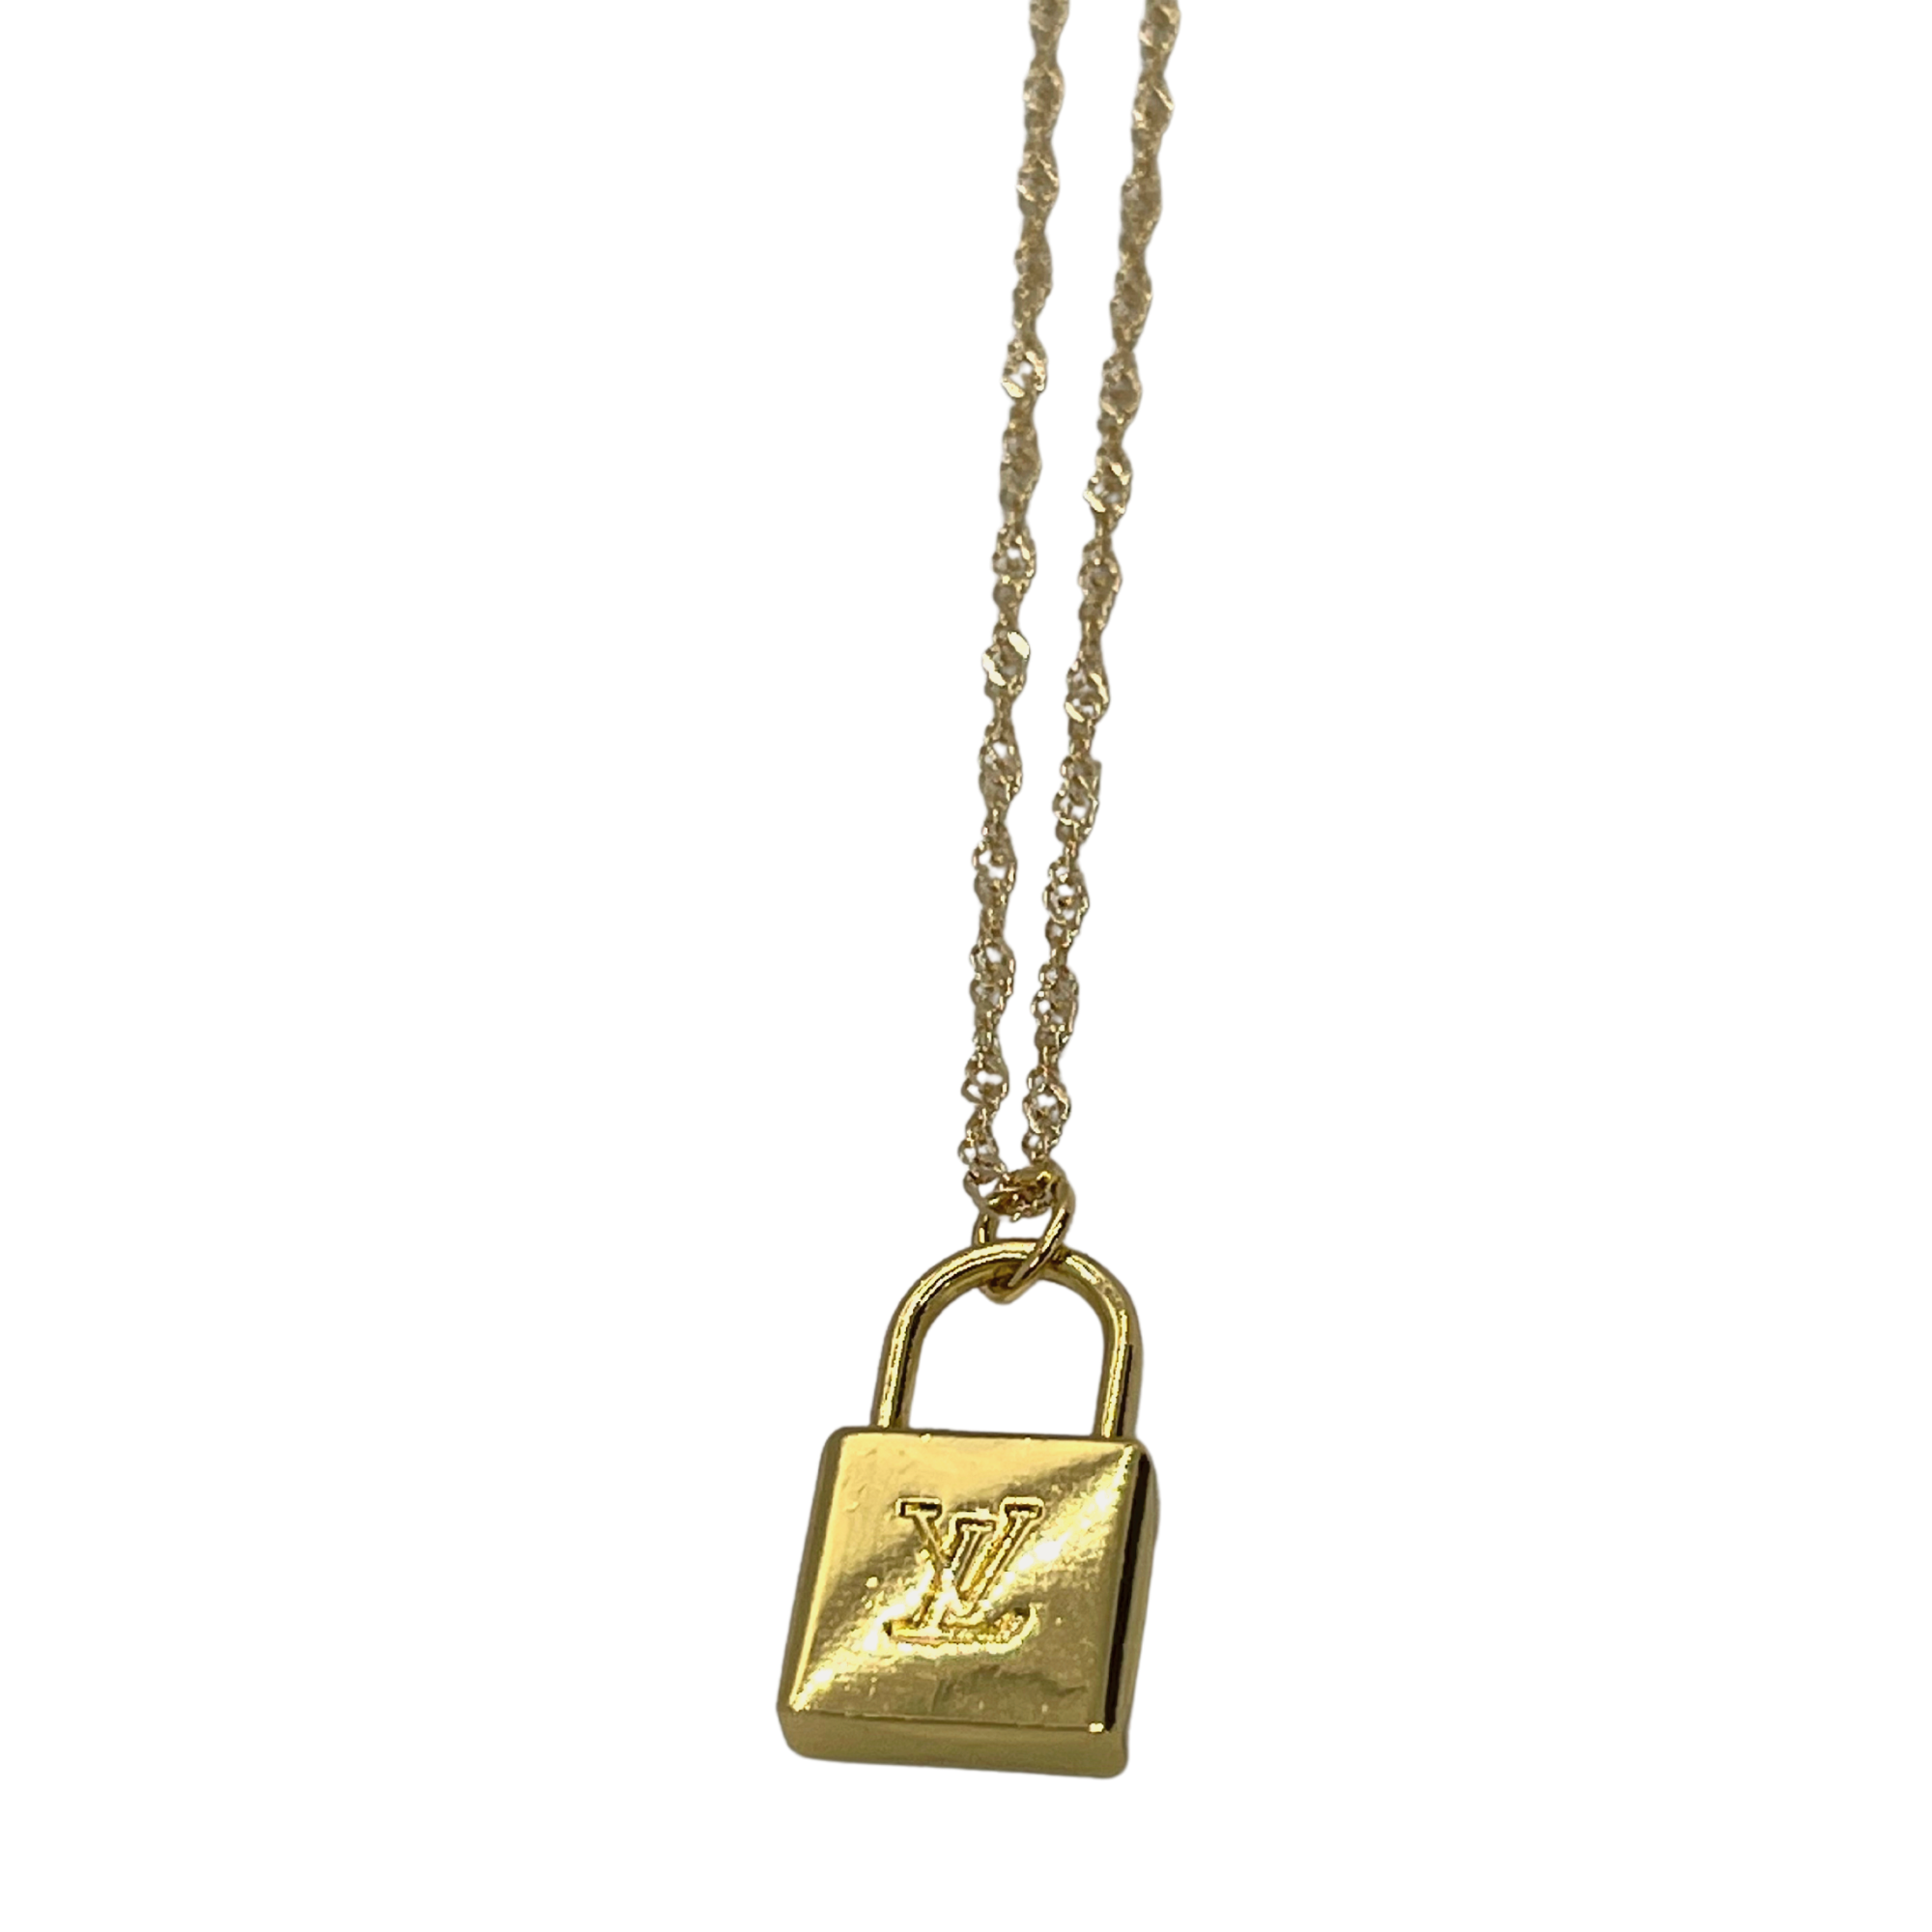 Authentic Louis Vuitton Lock Chain Necklace for Him | Mens jewelry, Chains  jewelry, Necklace designs